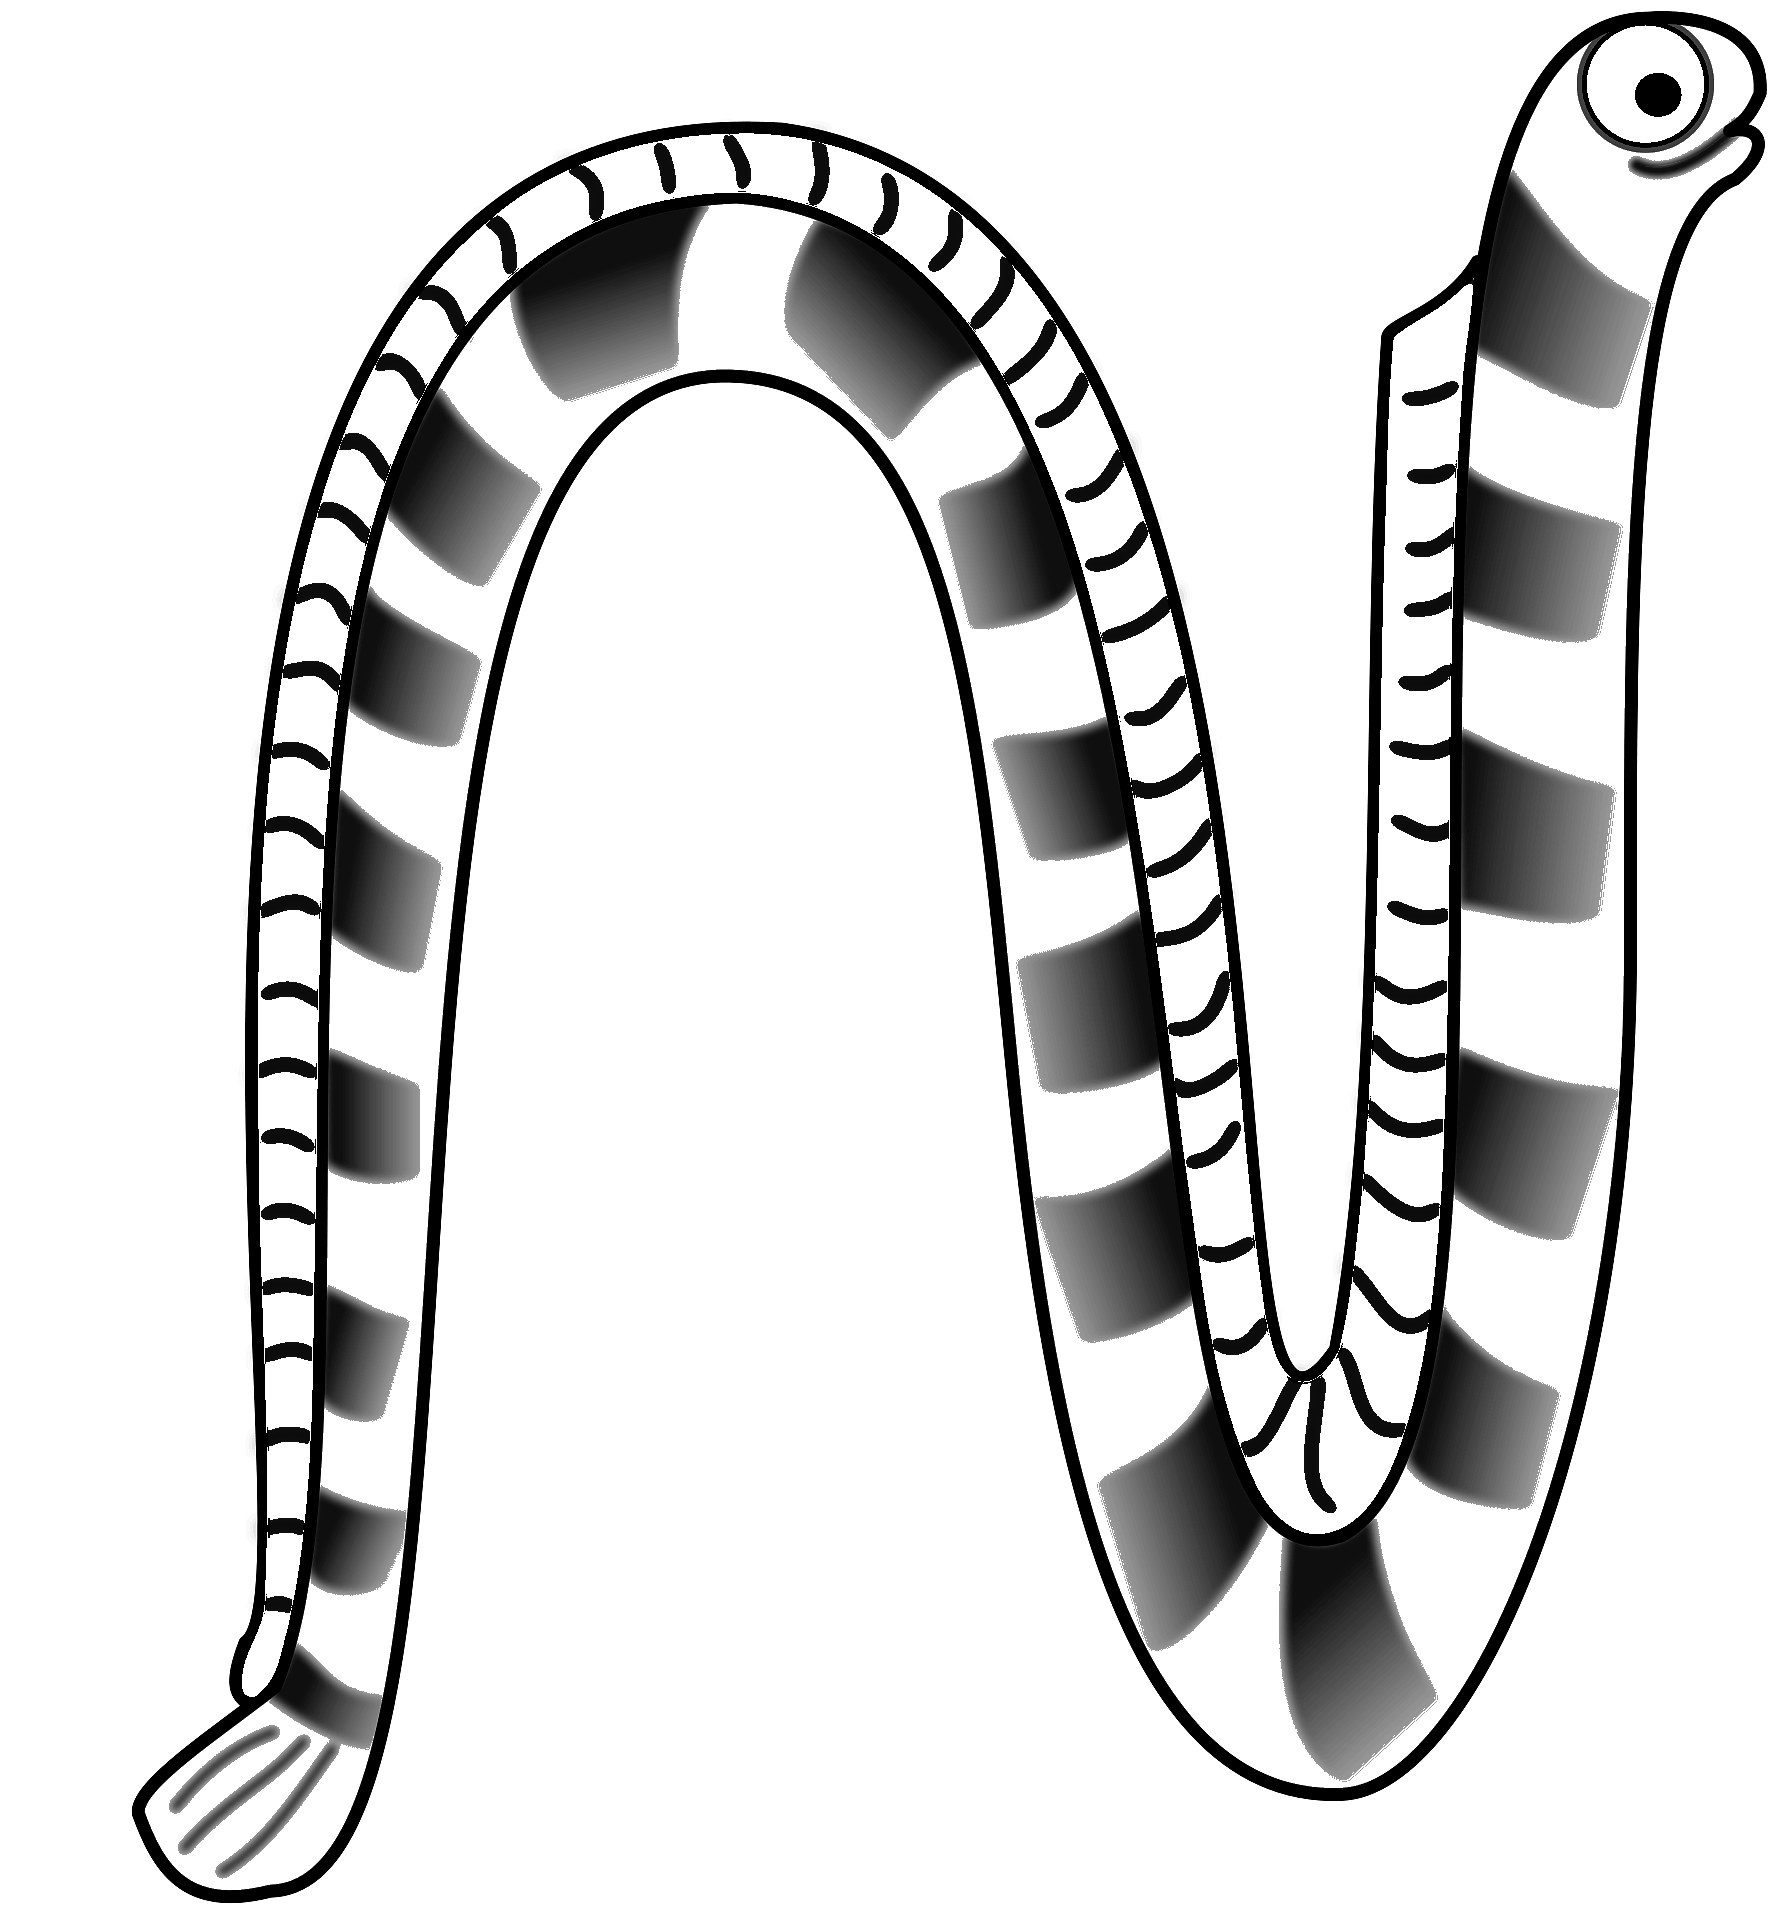 Coloring page of a cartoon style snake